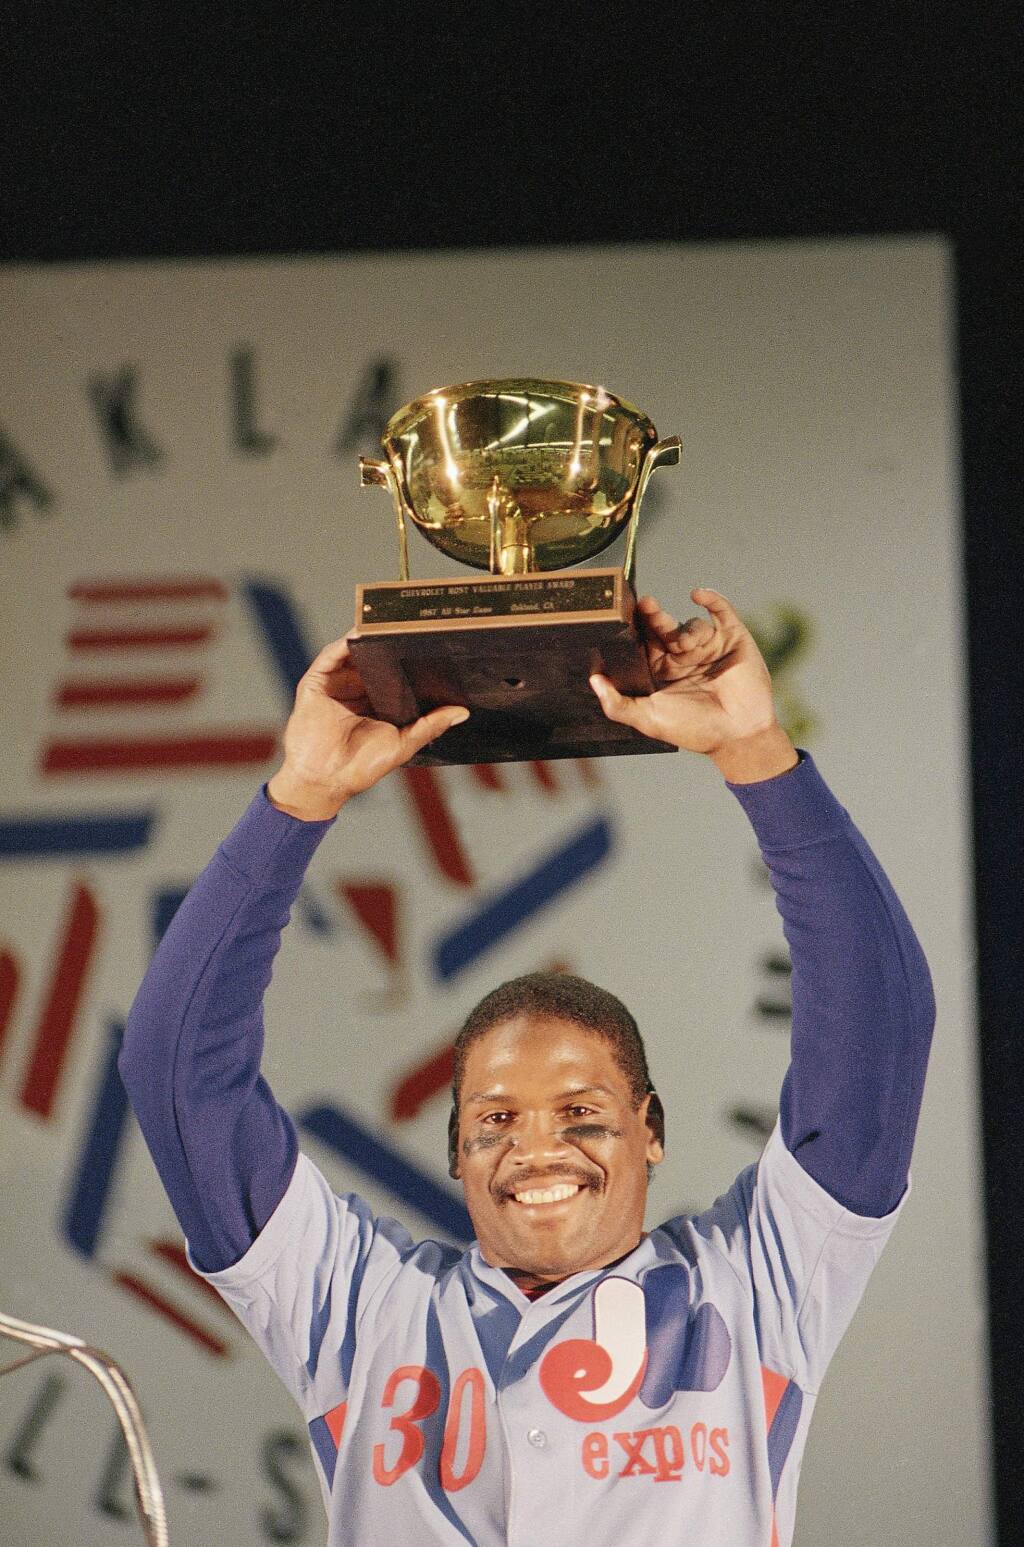 MLB legend Tim Raines' career finally recognized as Hall of Fame-worthy